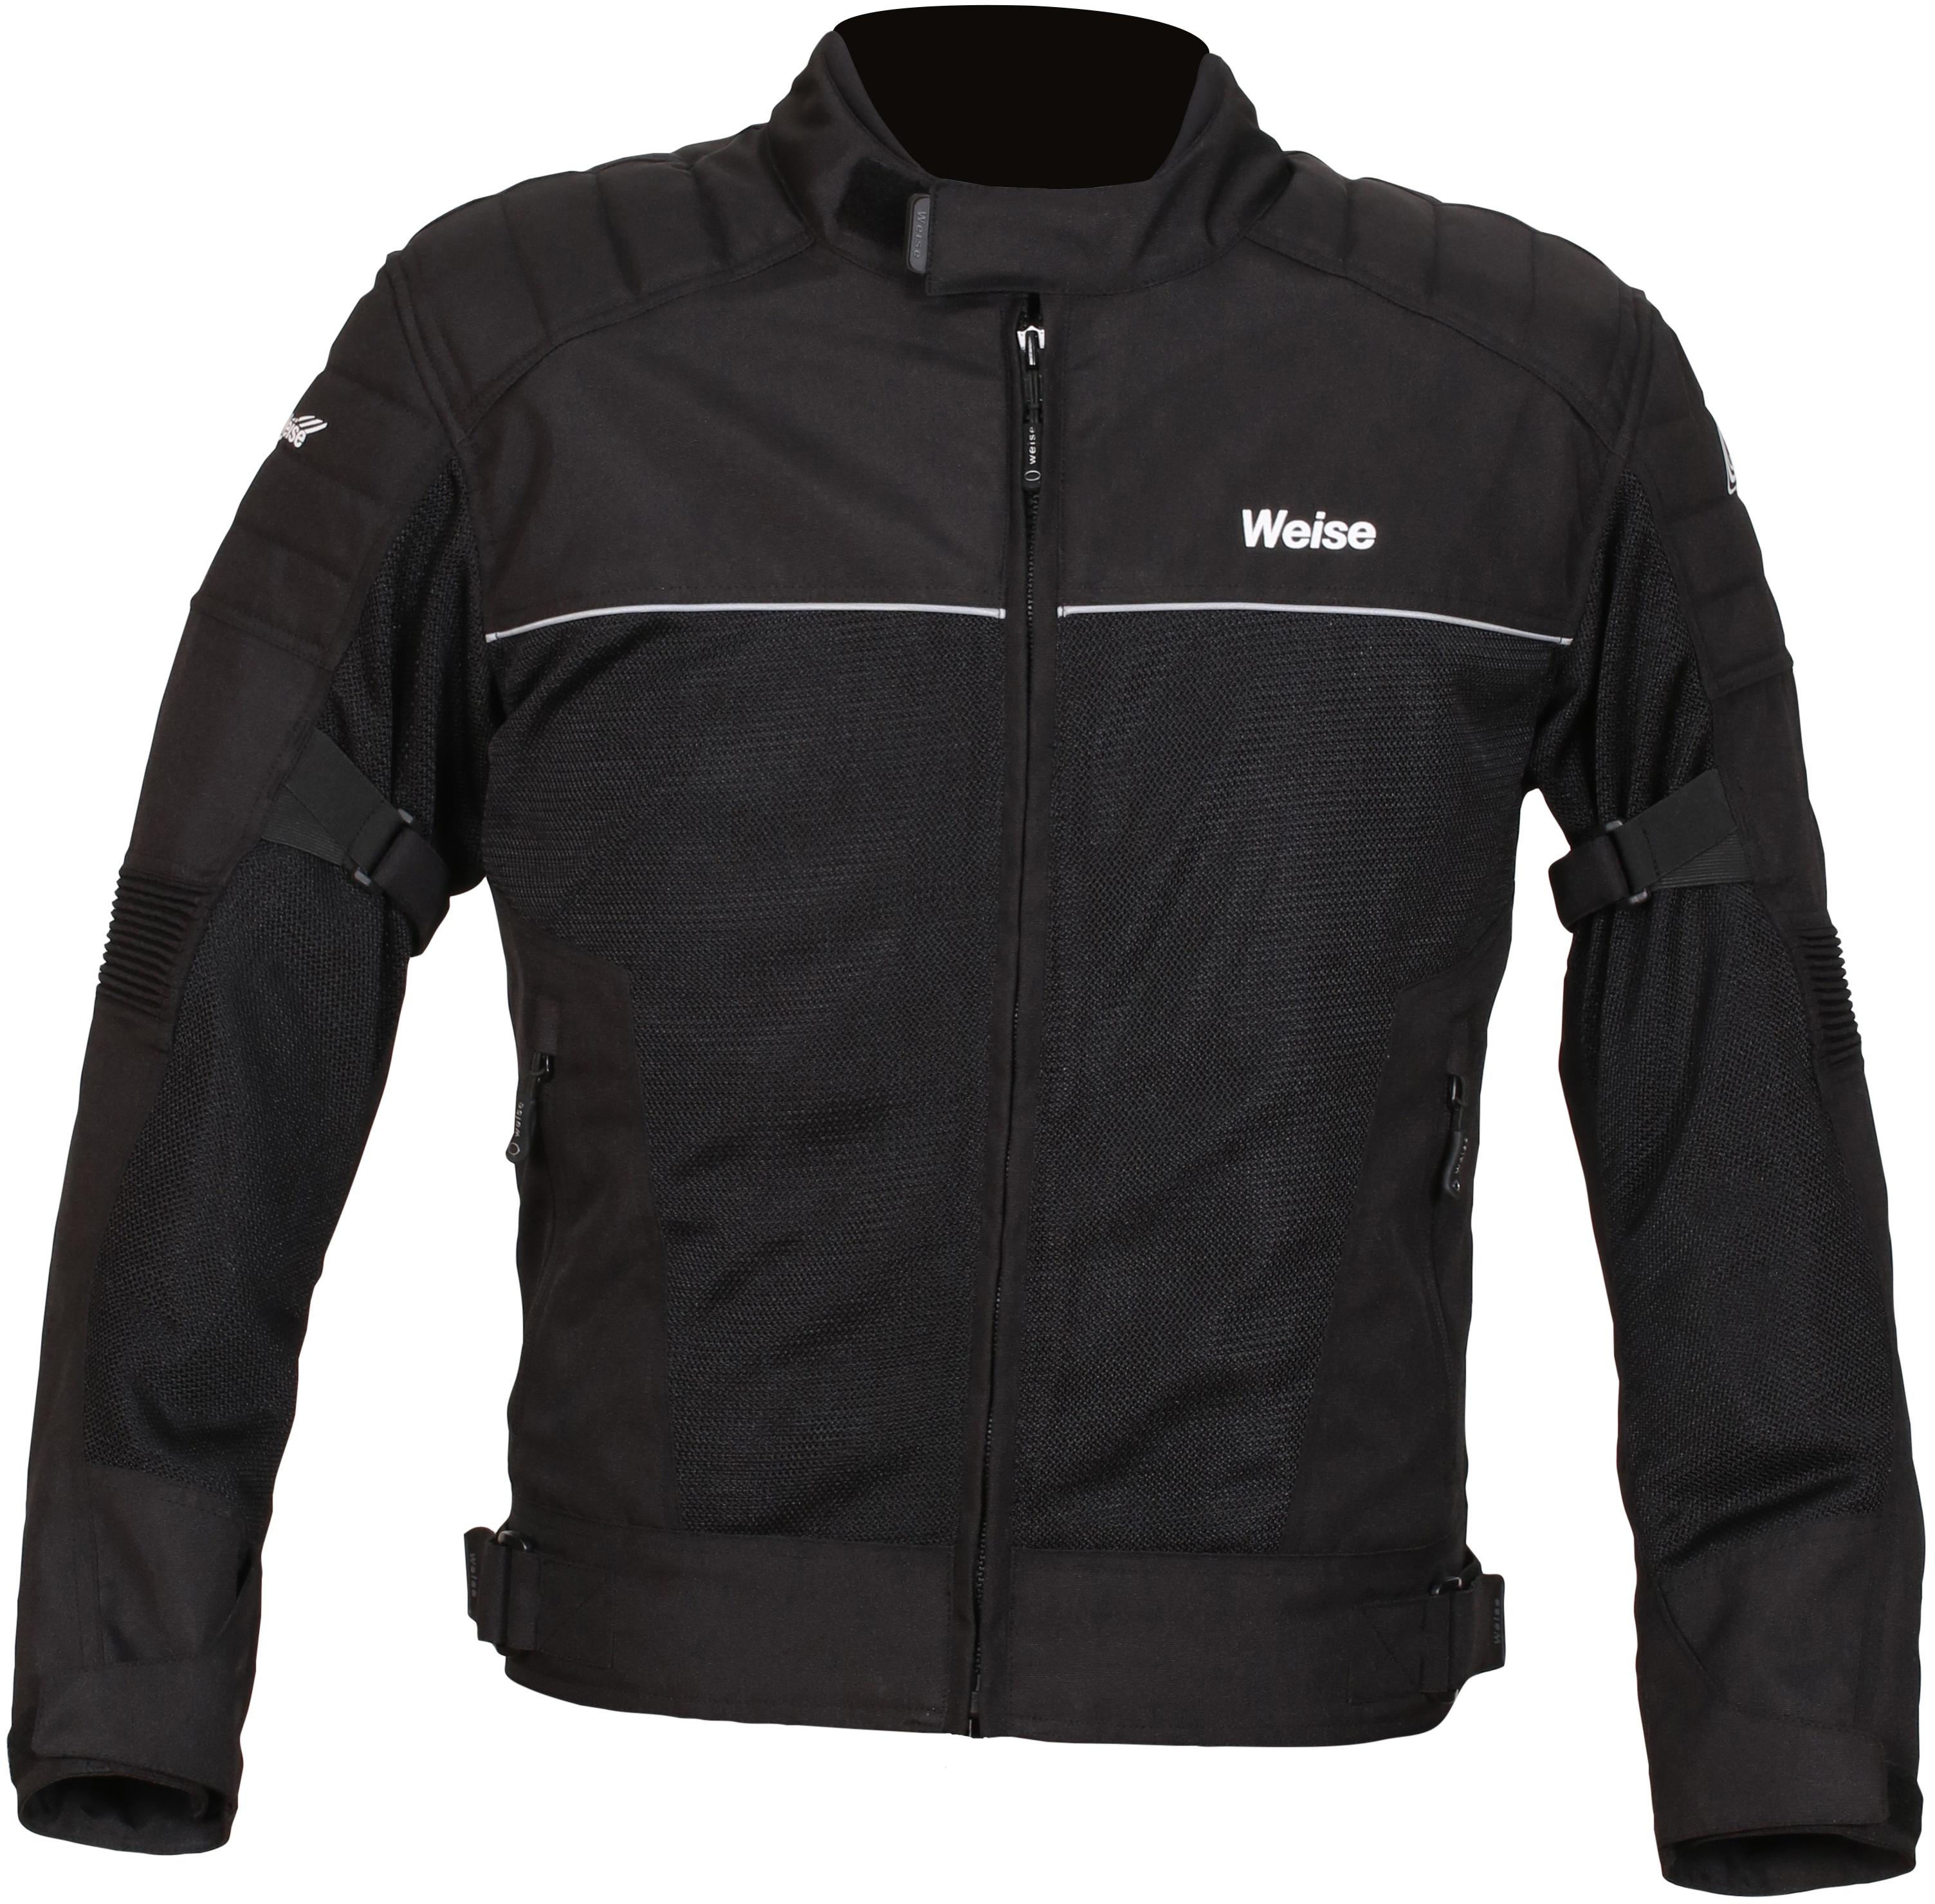 Weise Scout Motorcycle Jacket - Black, 5Xl